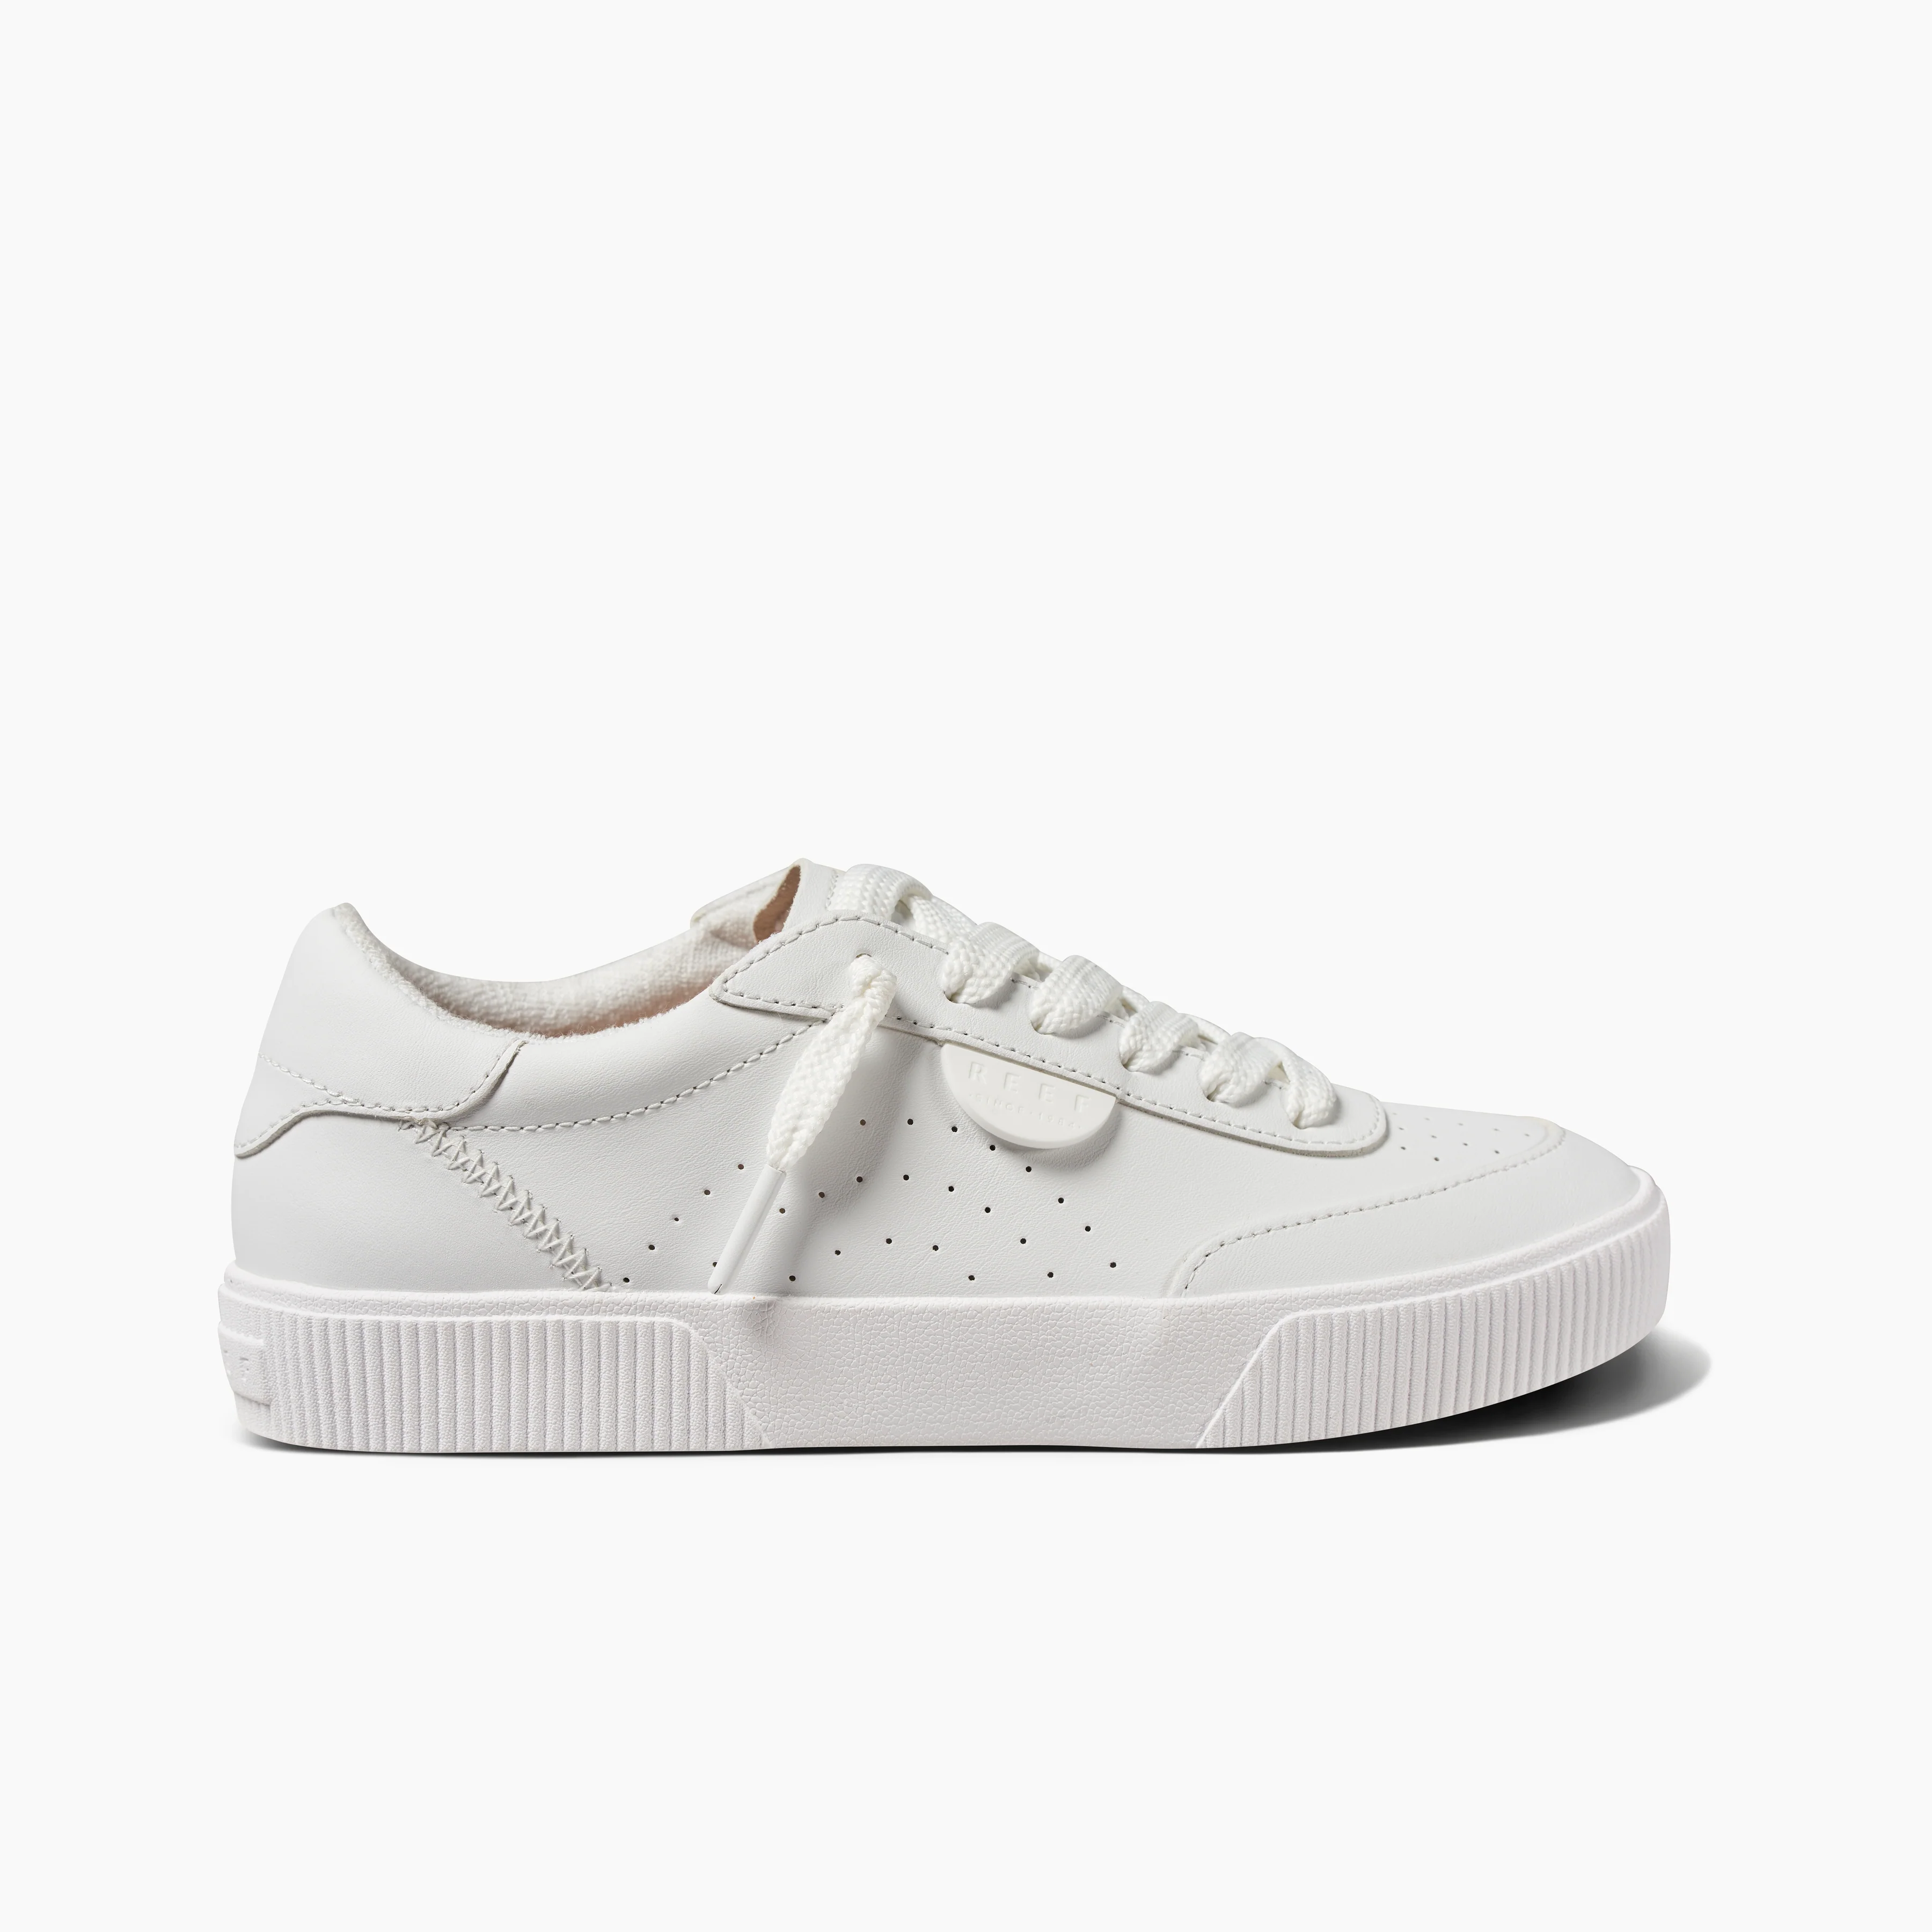 Lay Day Seas: Women's White Leather Sneakers side view